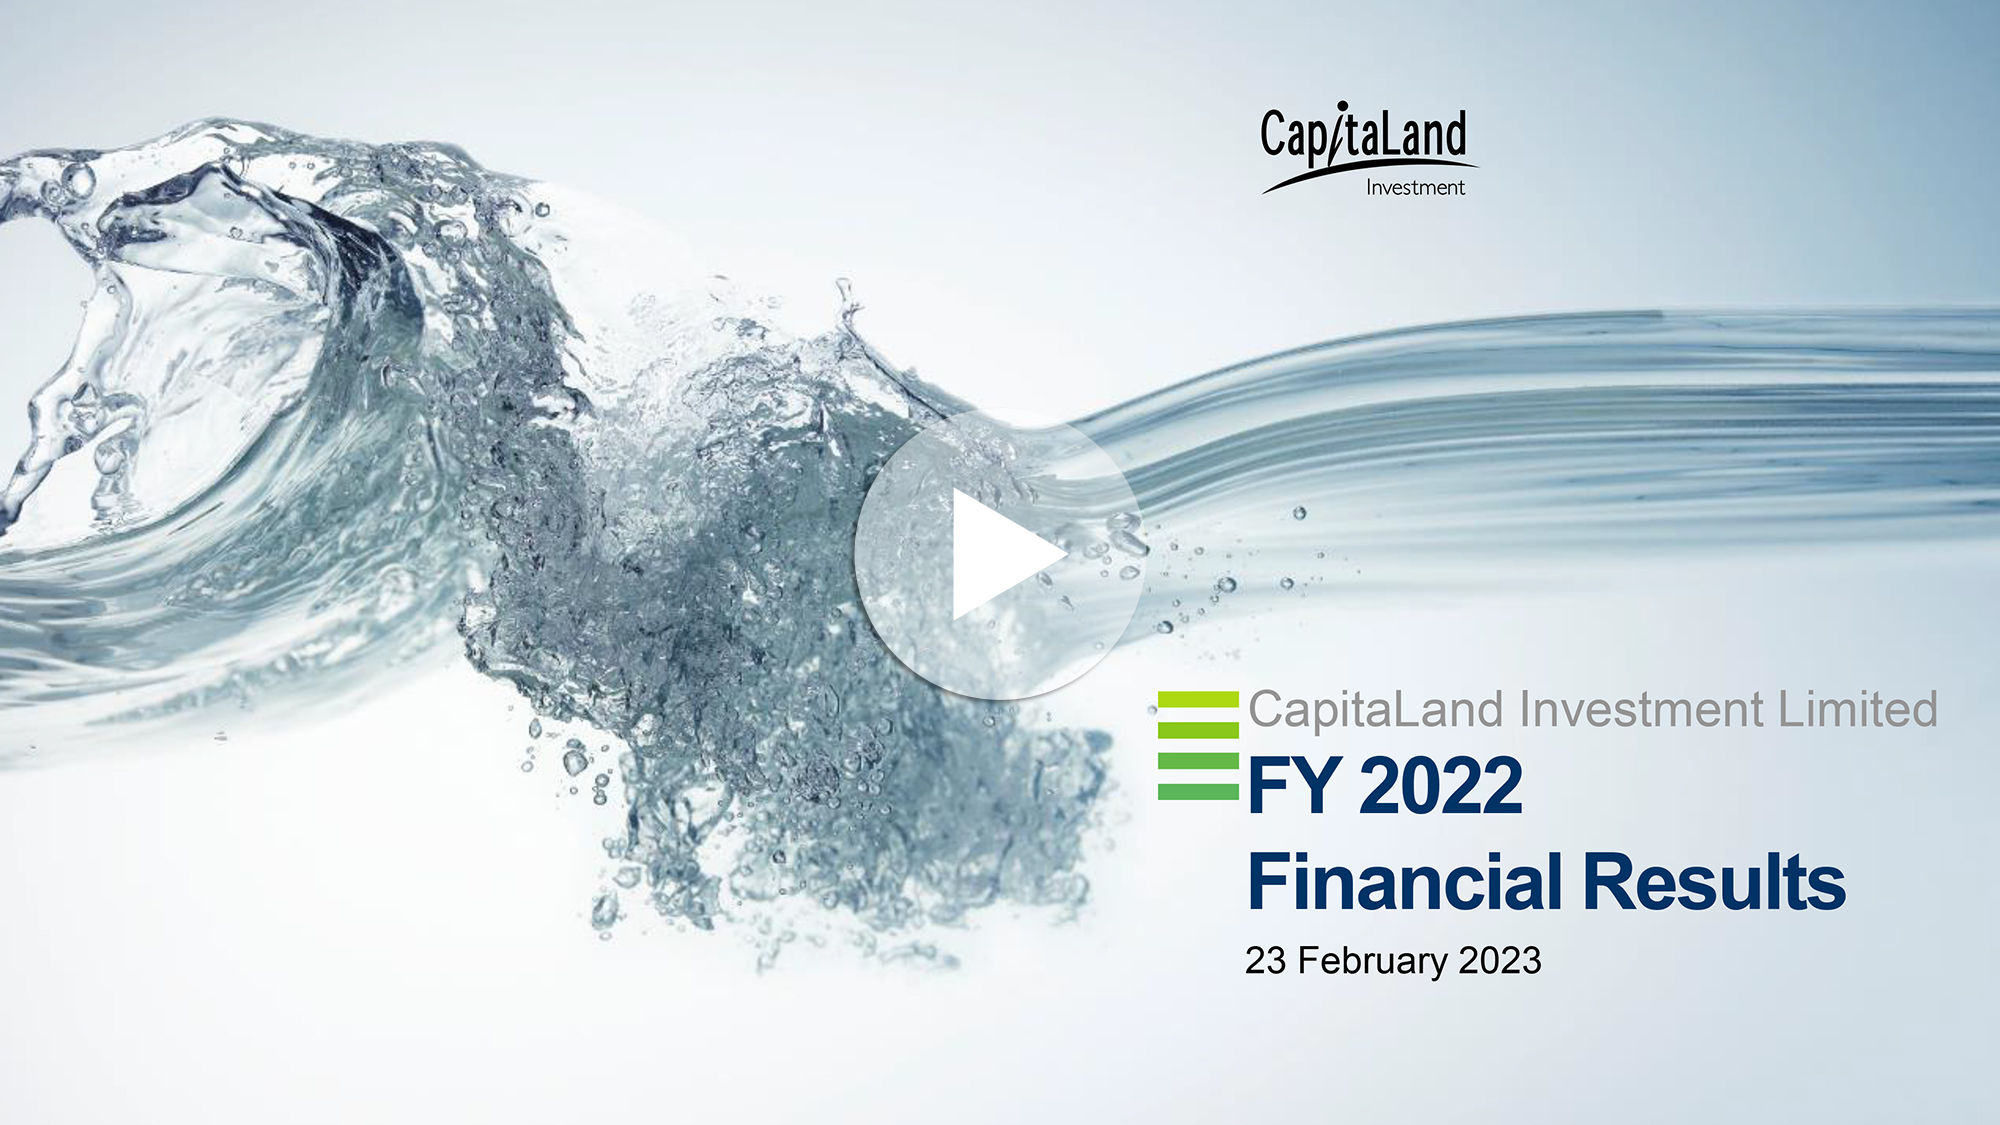 FY 2022 Financial Results Briefing